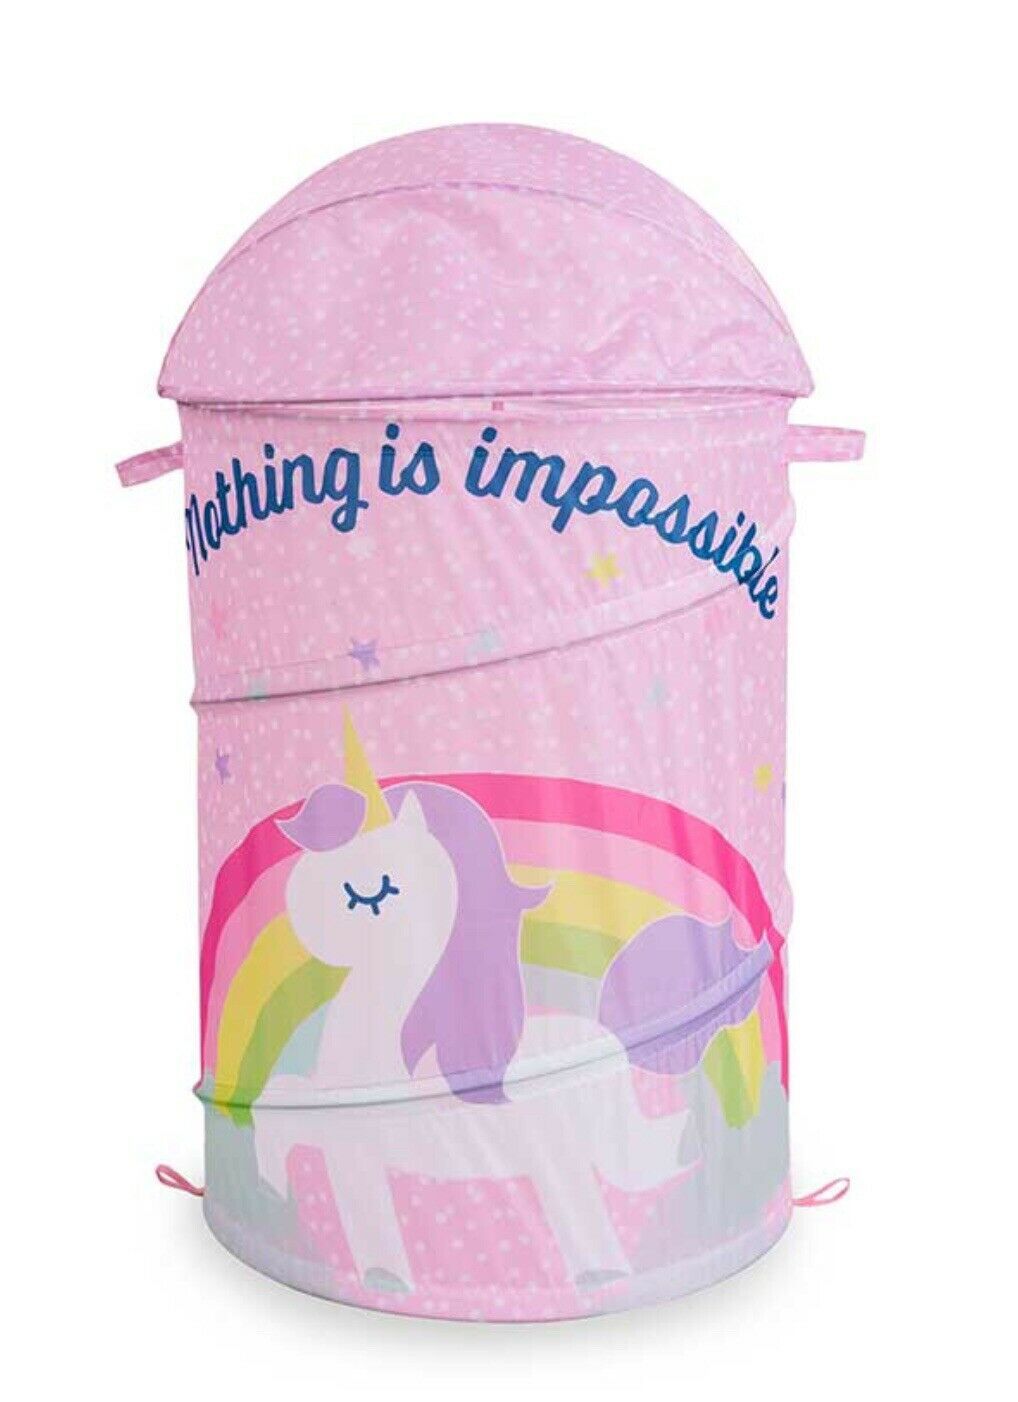 UNICORN AND RAINBOW TEENS-KIDS GIRLS HAMPER IDEAL FOR LAUNDRY OR STORE - $38.16